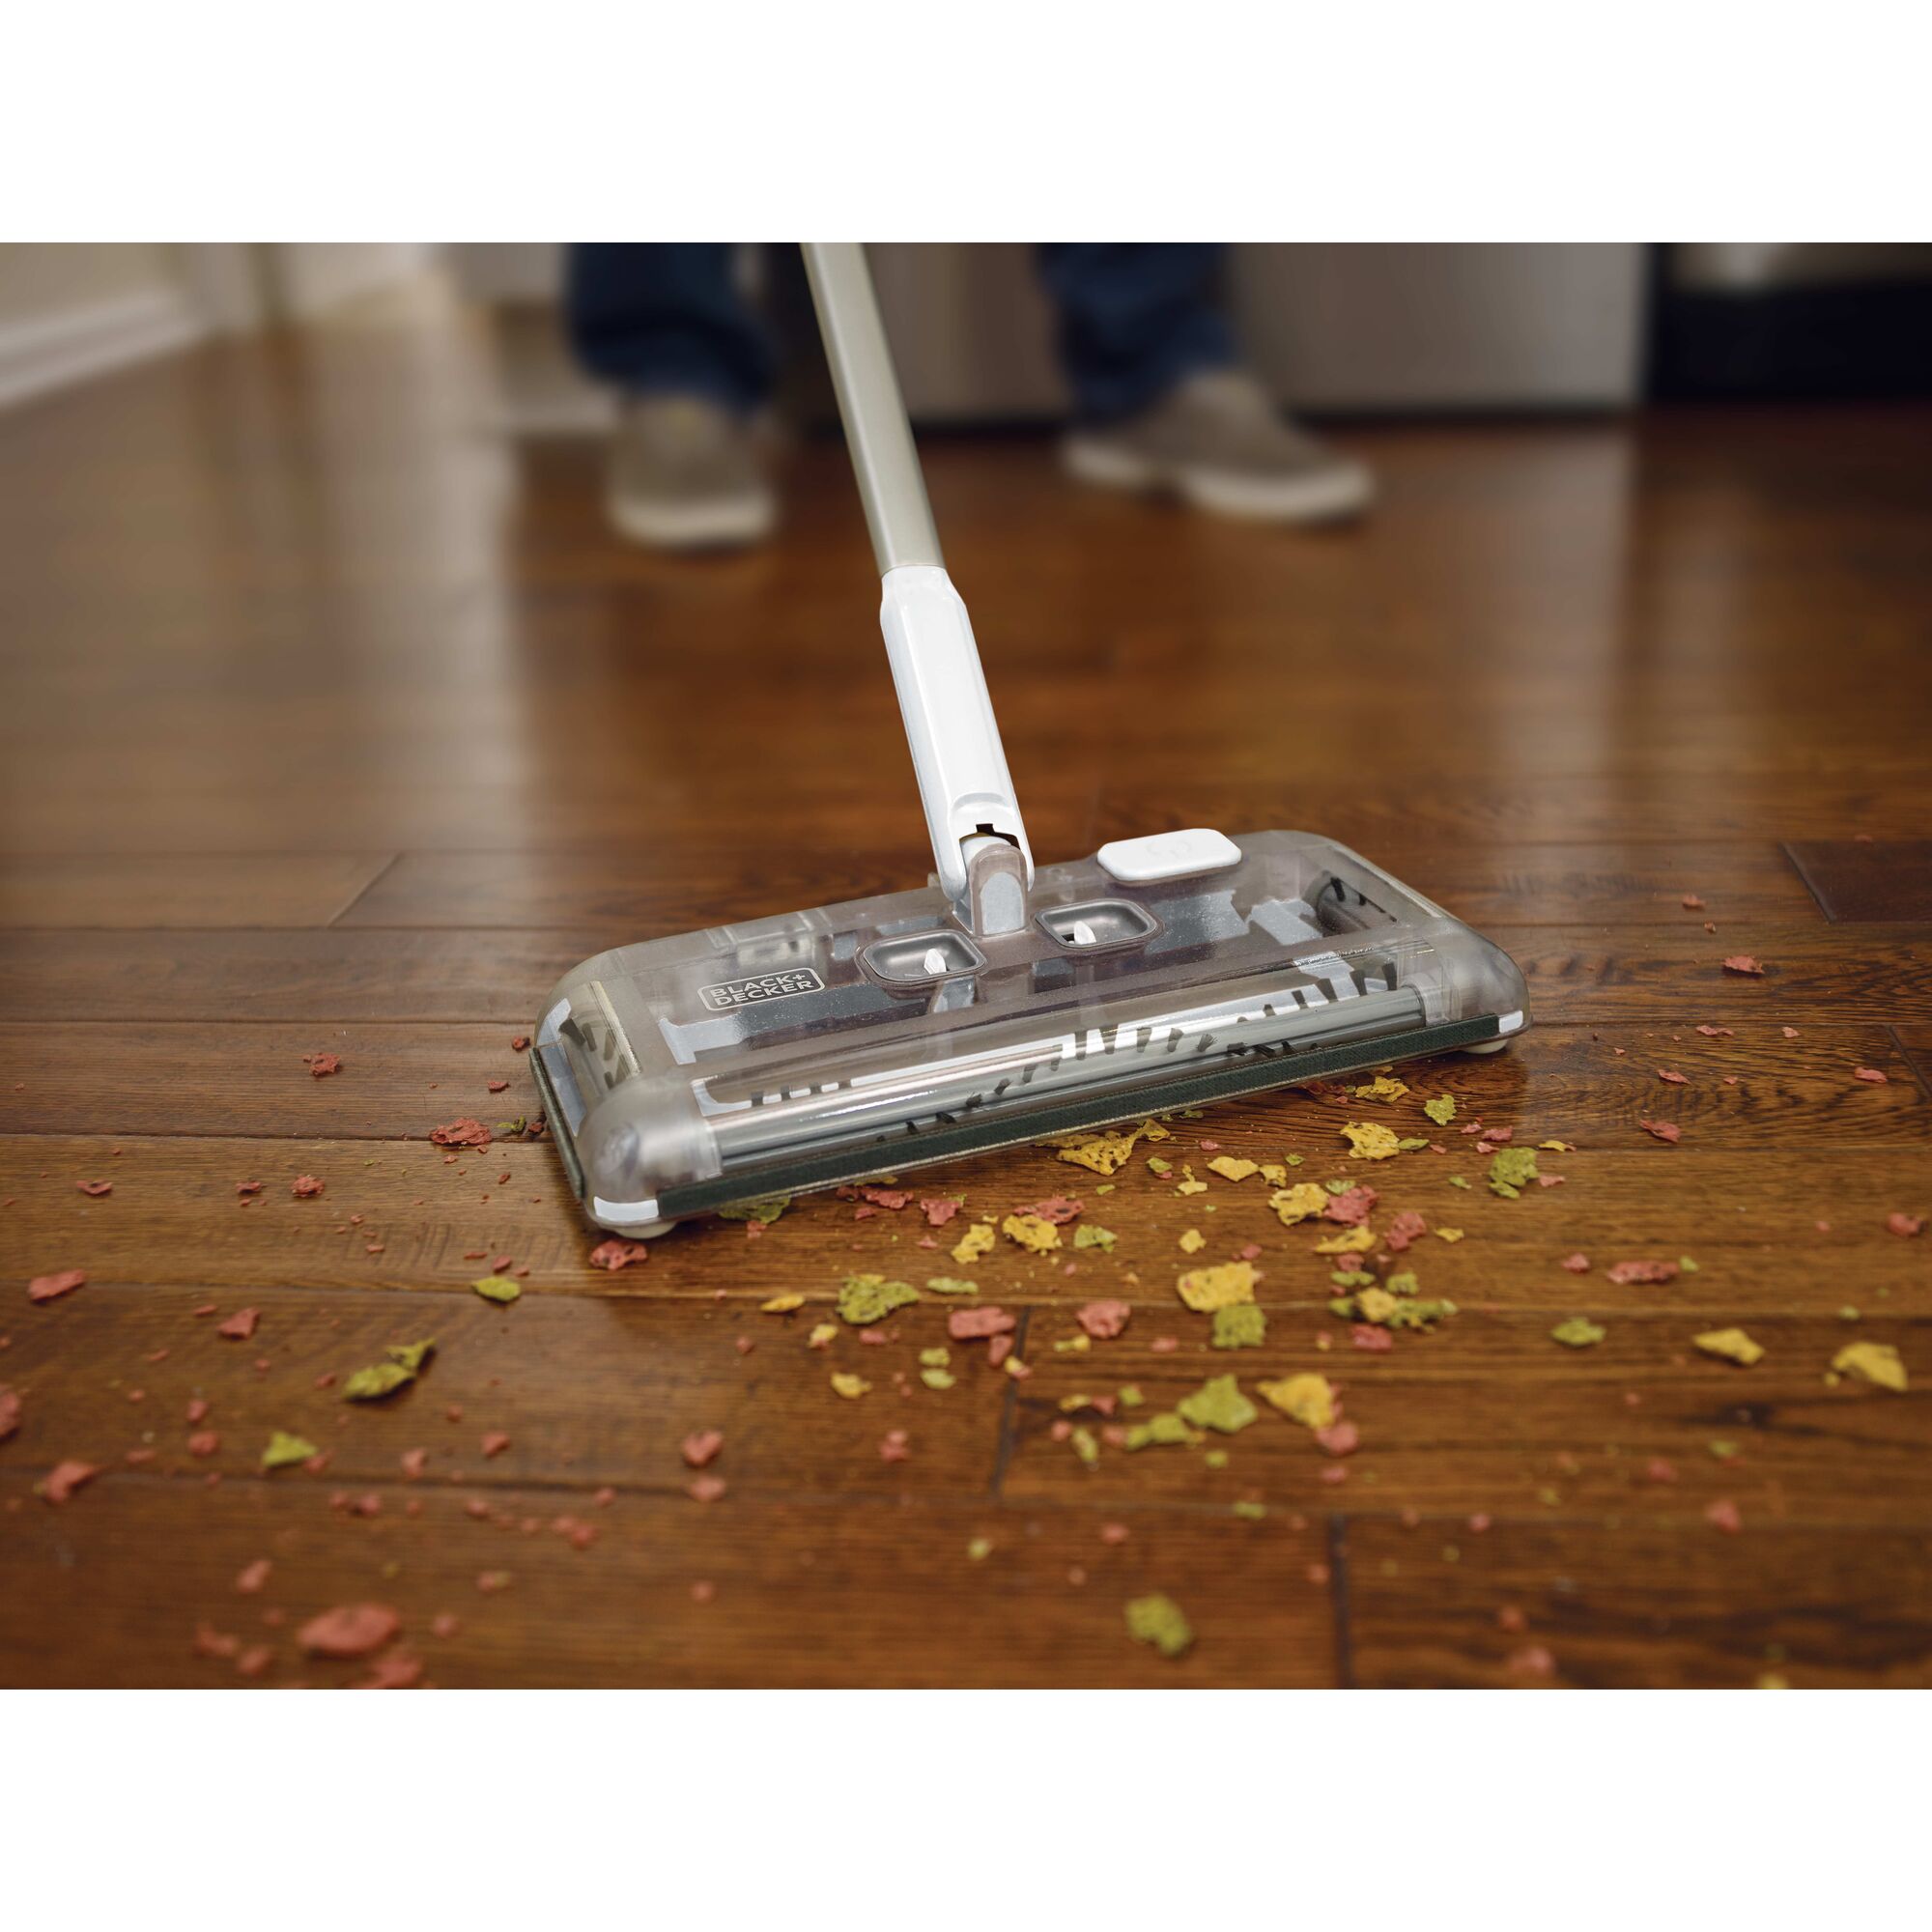 Person using black and decker 50 Minute Powered Floor Sweeper to clean debris off of a wooden floor.